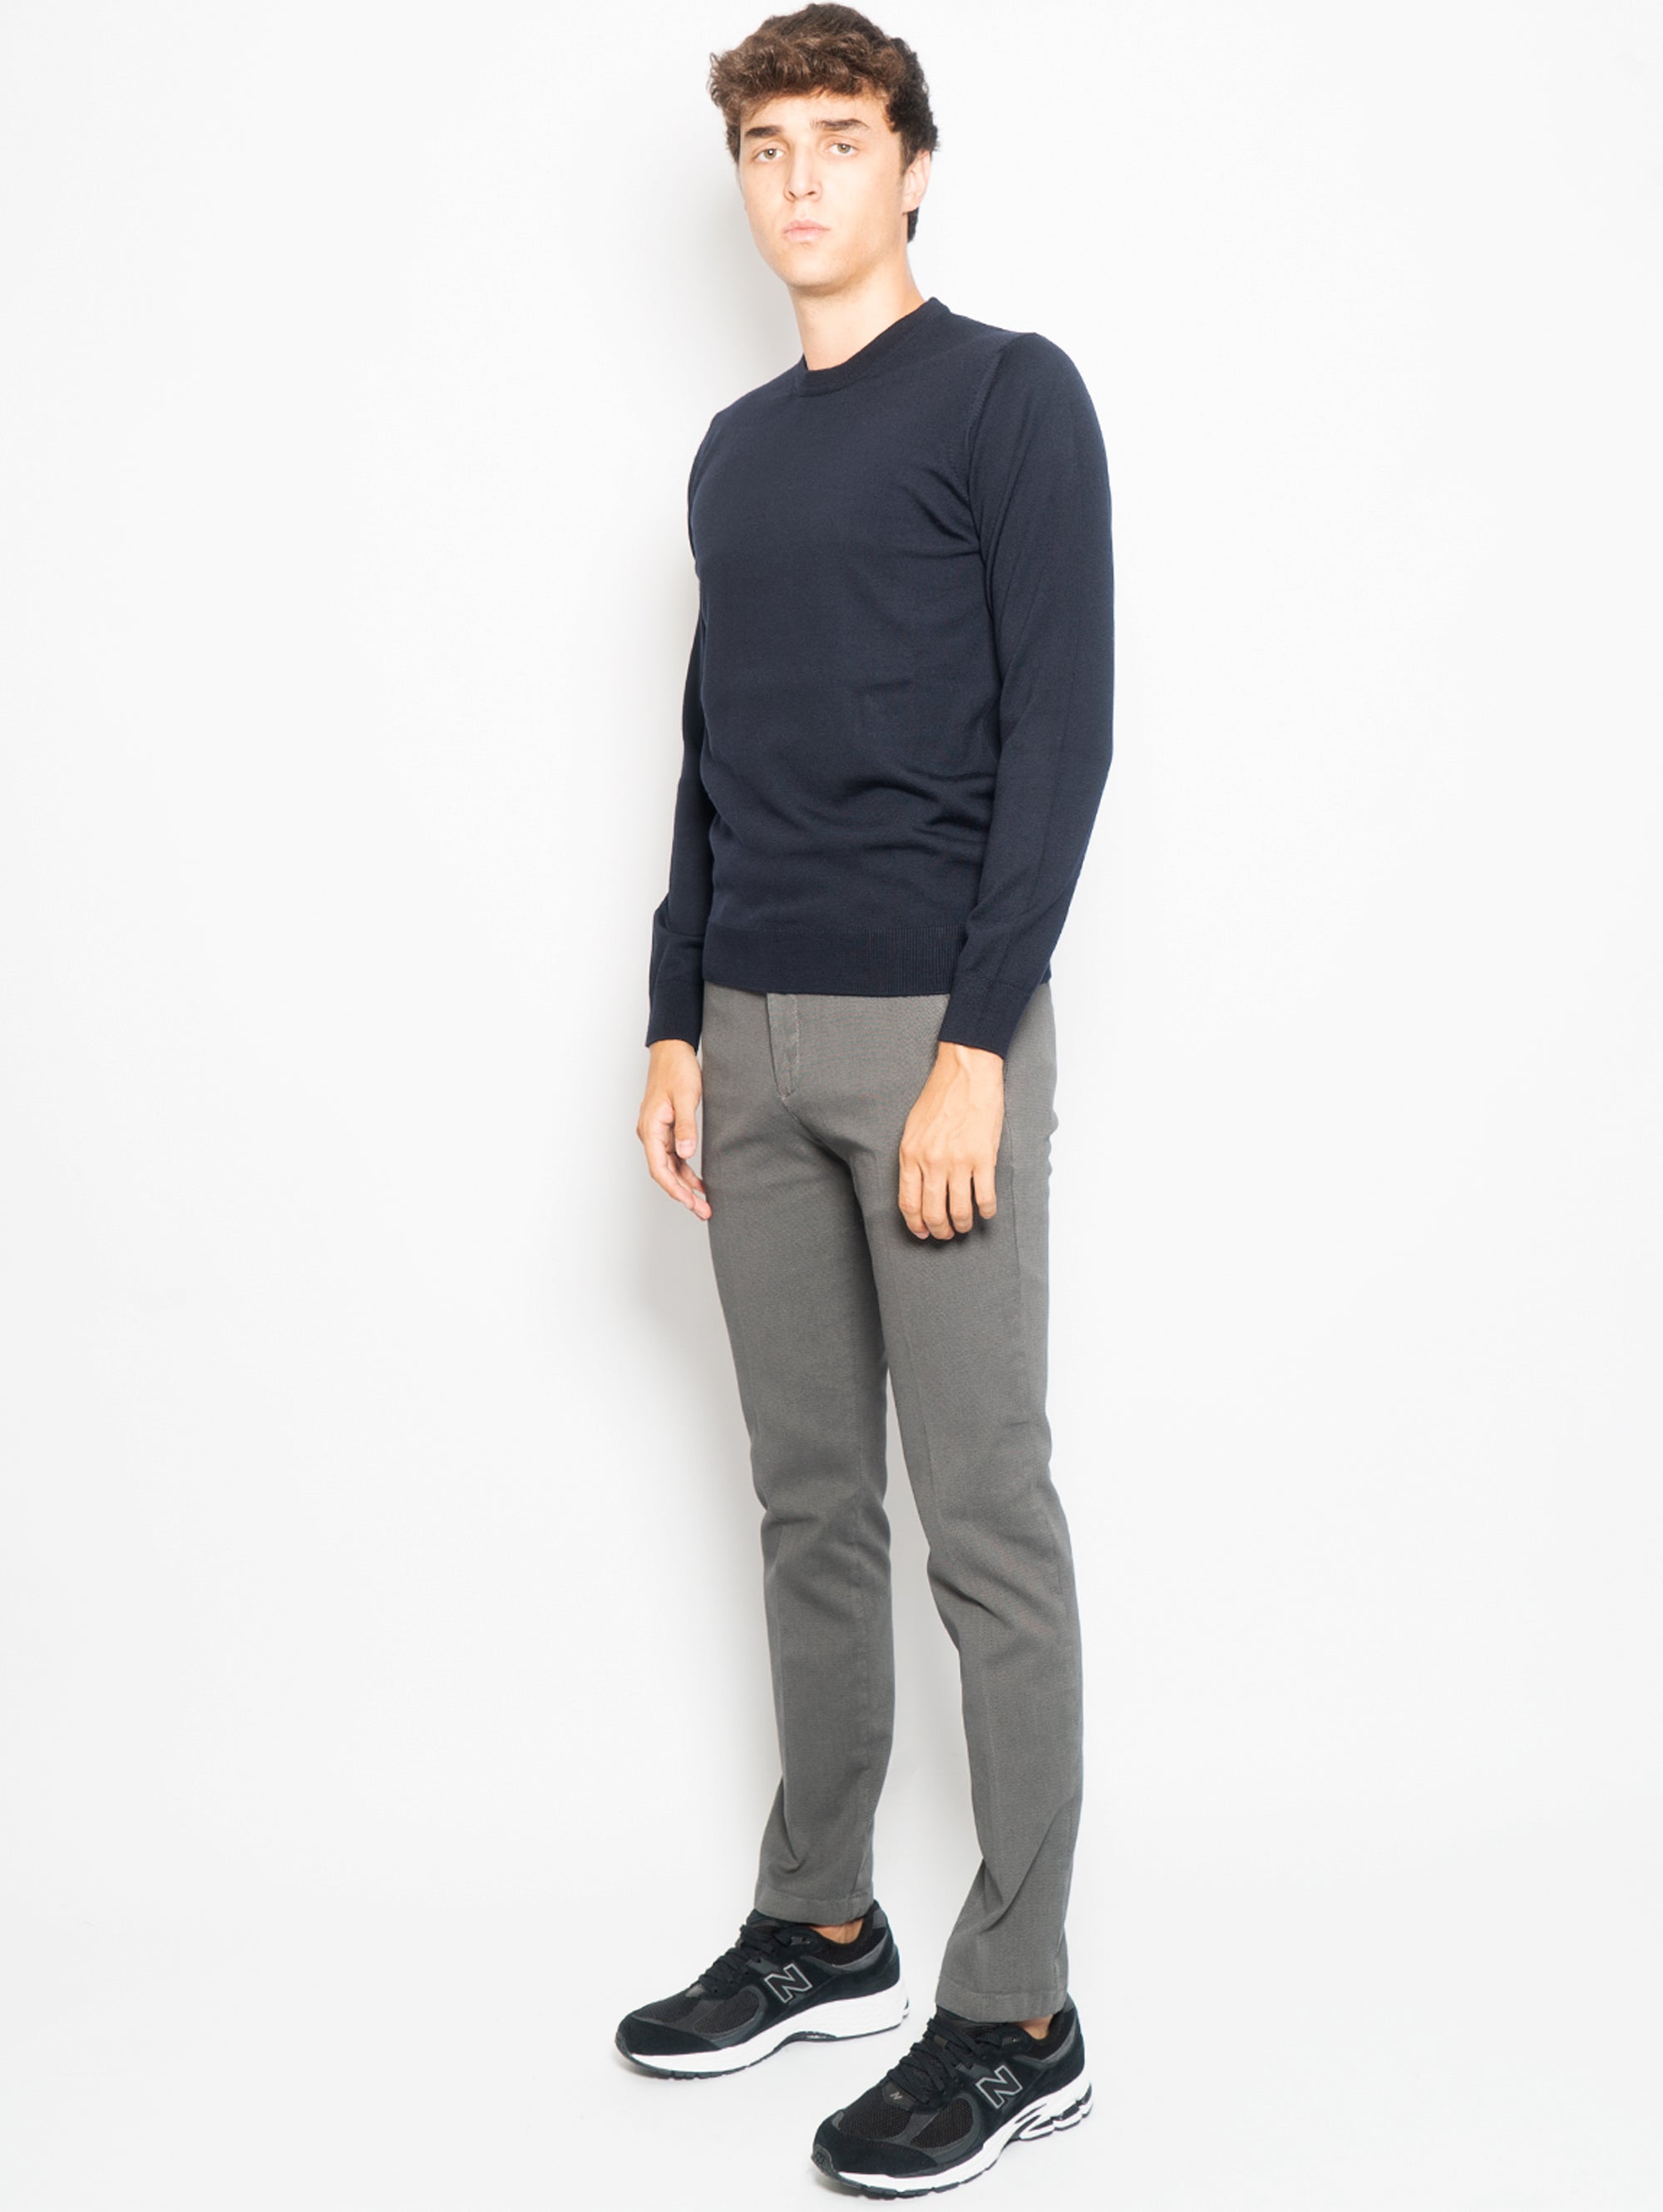 Chino Trousers in Sage Textured Cotton